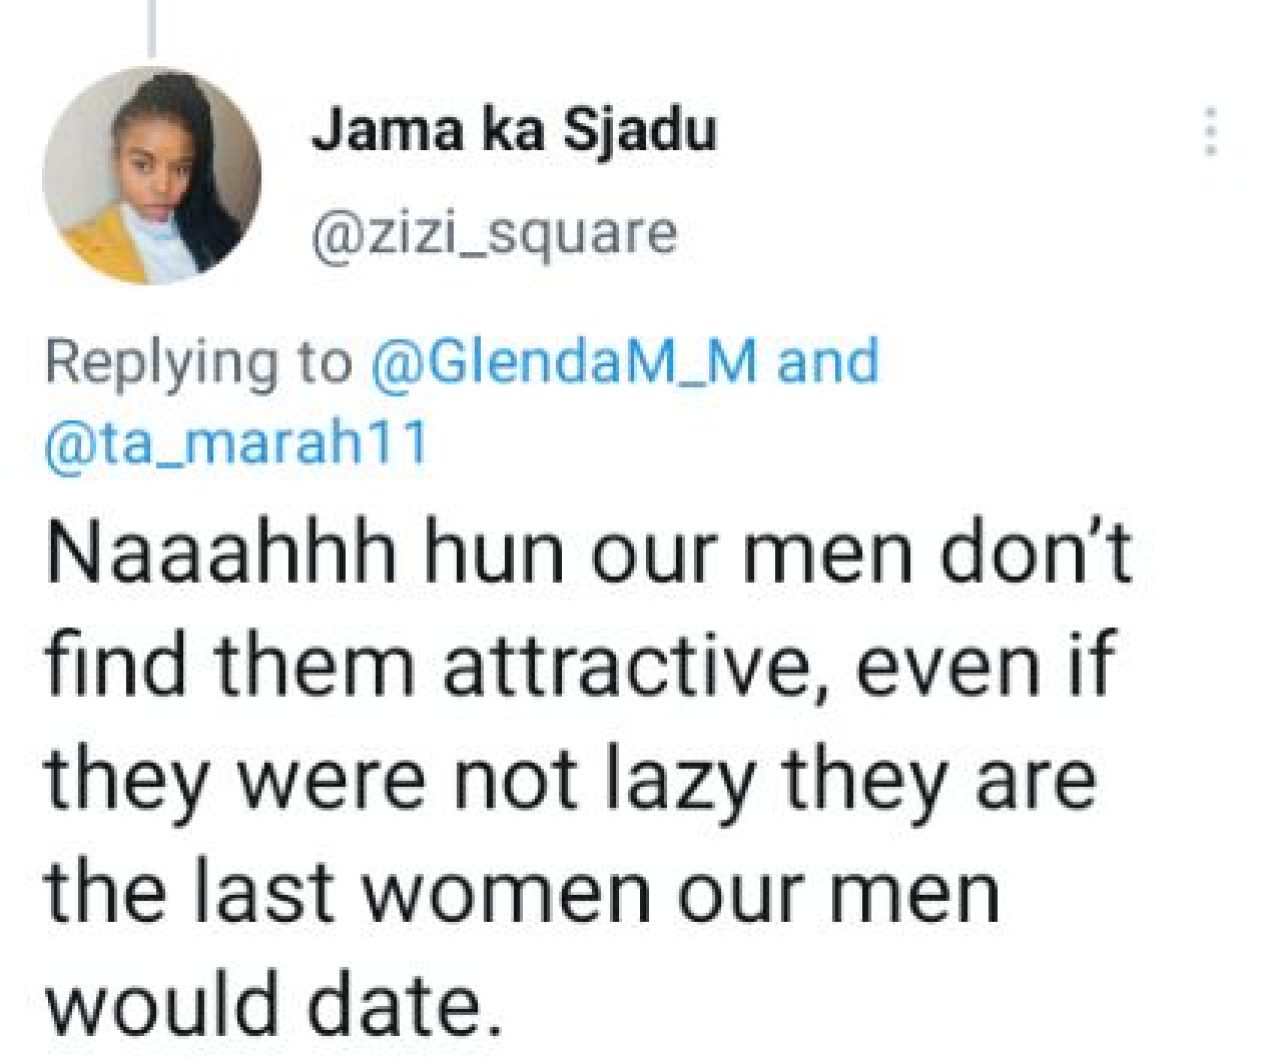 Our men have standards - South African woman claim fellow countrymen avoid dating Nigerian women because they don't find them attractive. AdvertAfrica News on afronewswire.com: Amplifying Africa's Voice | afronewswire.com | Breaking News & Stories